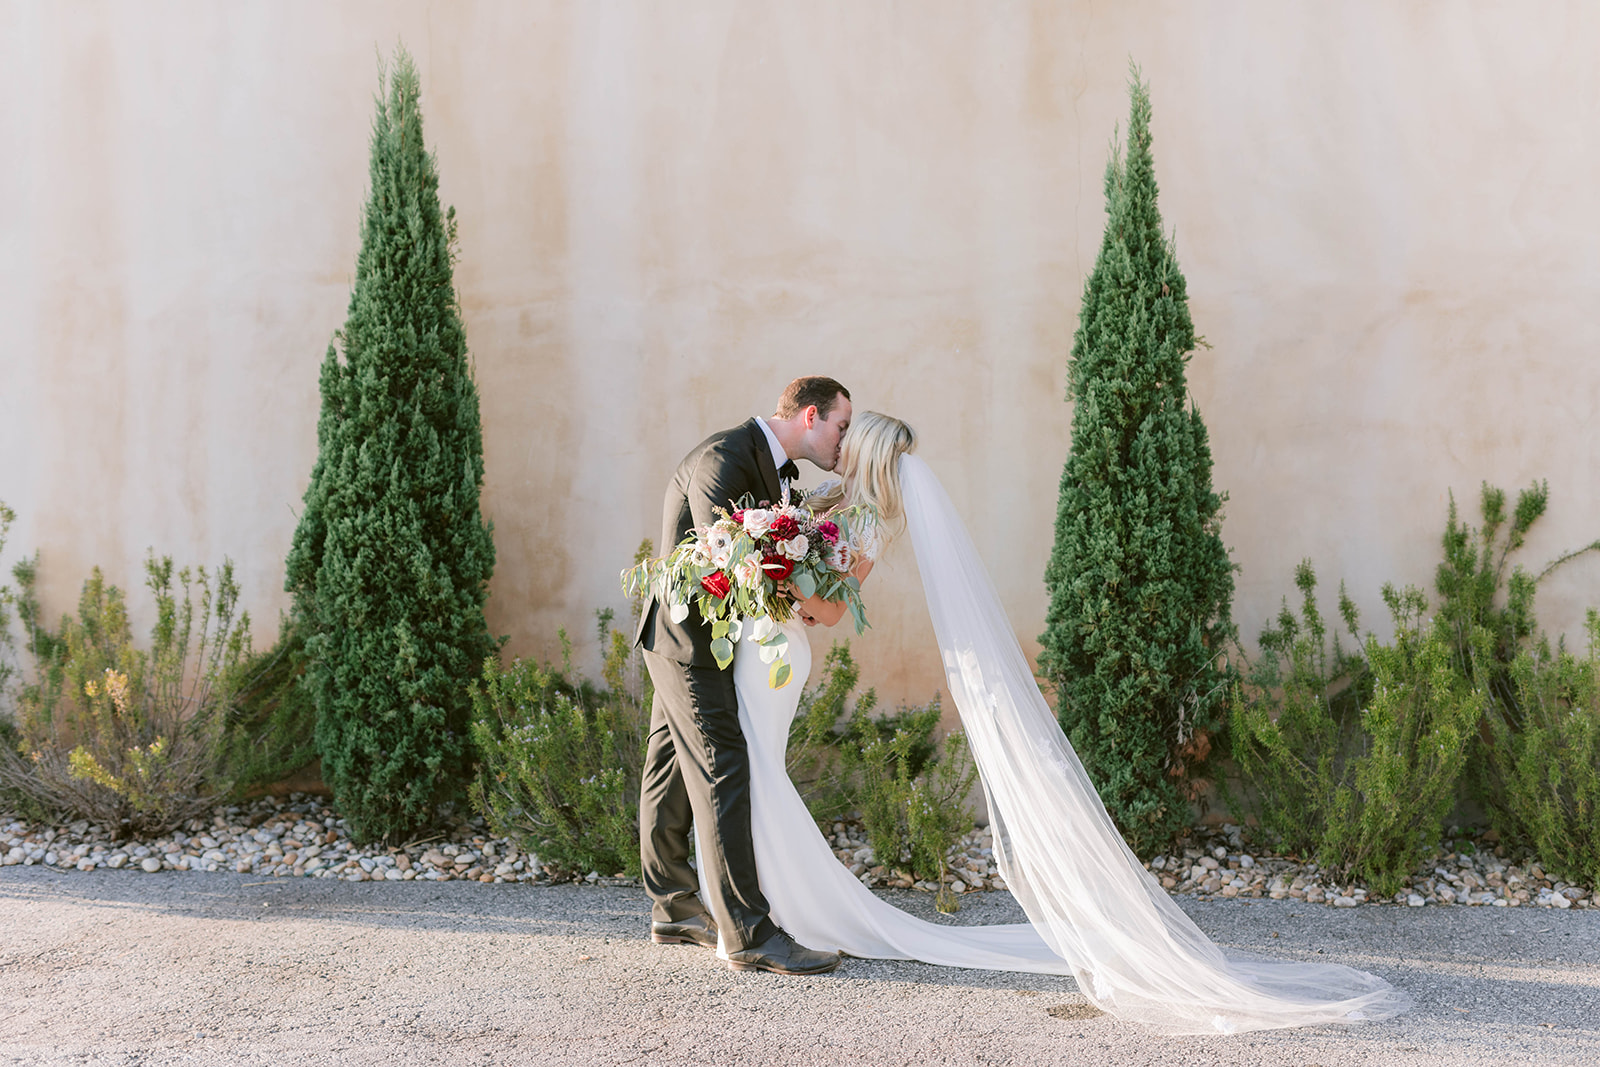 Bride and groom portrait with veil whilst bride holds a burgundy and blush garden style bouquet